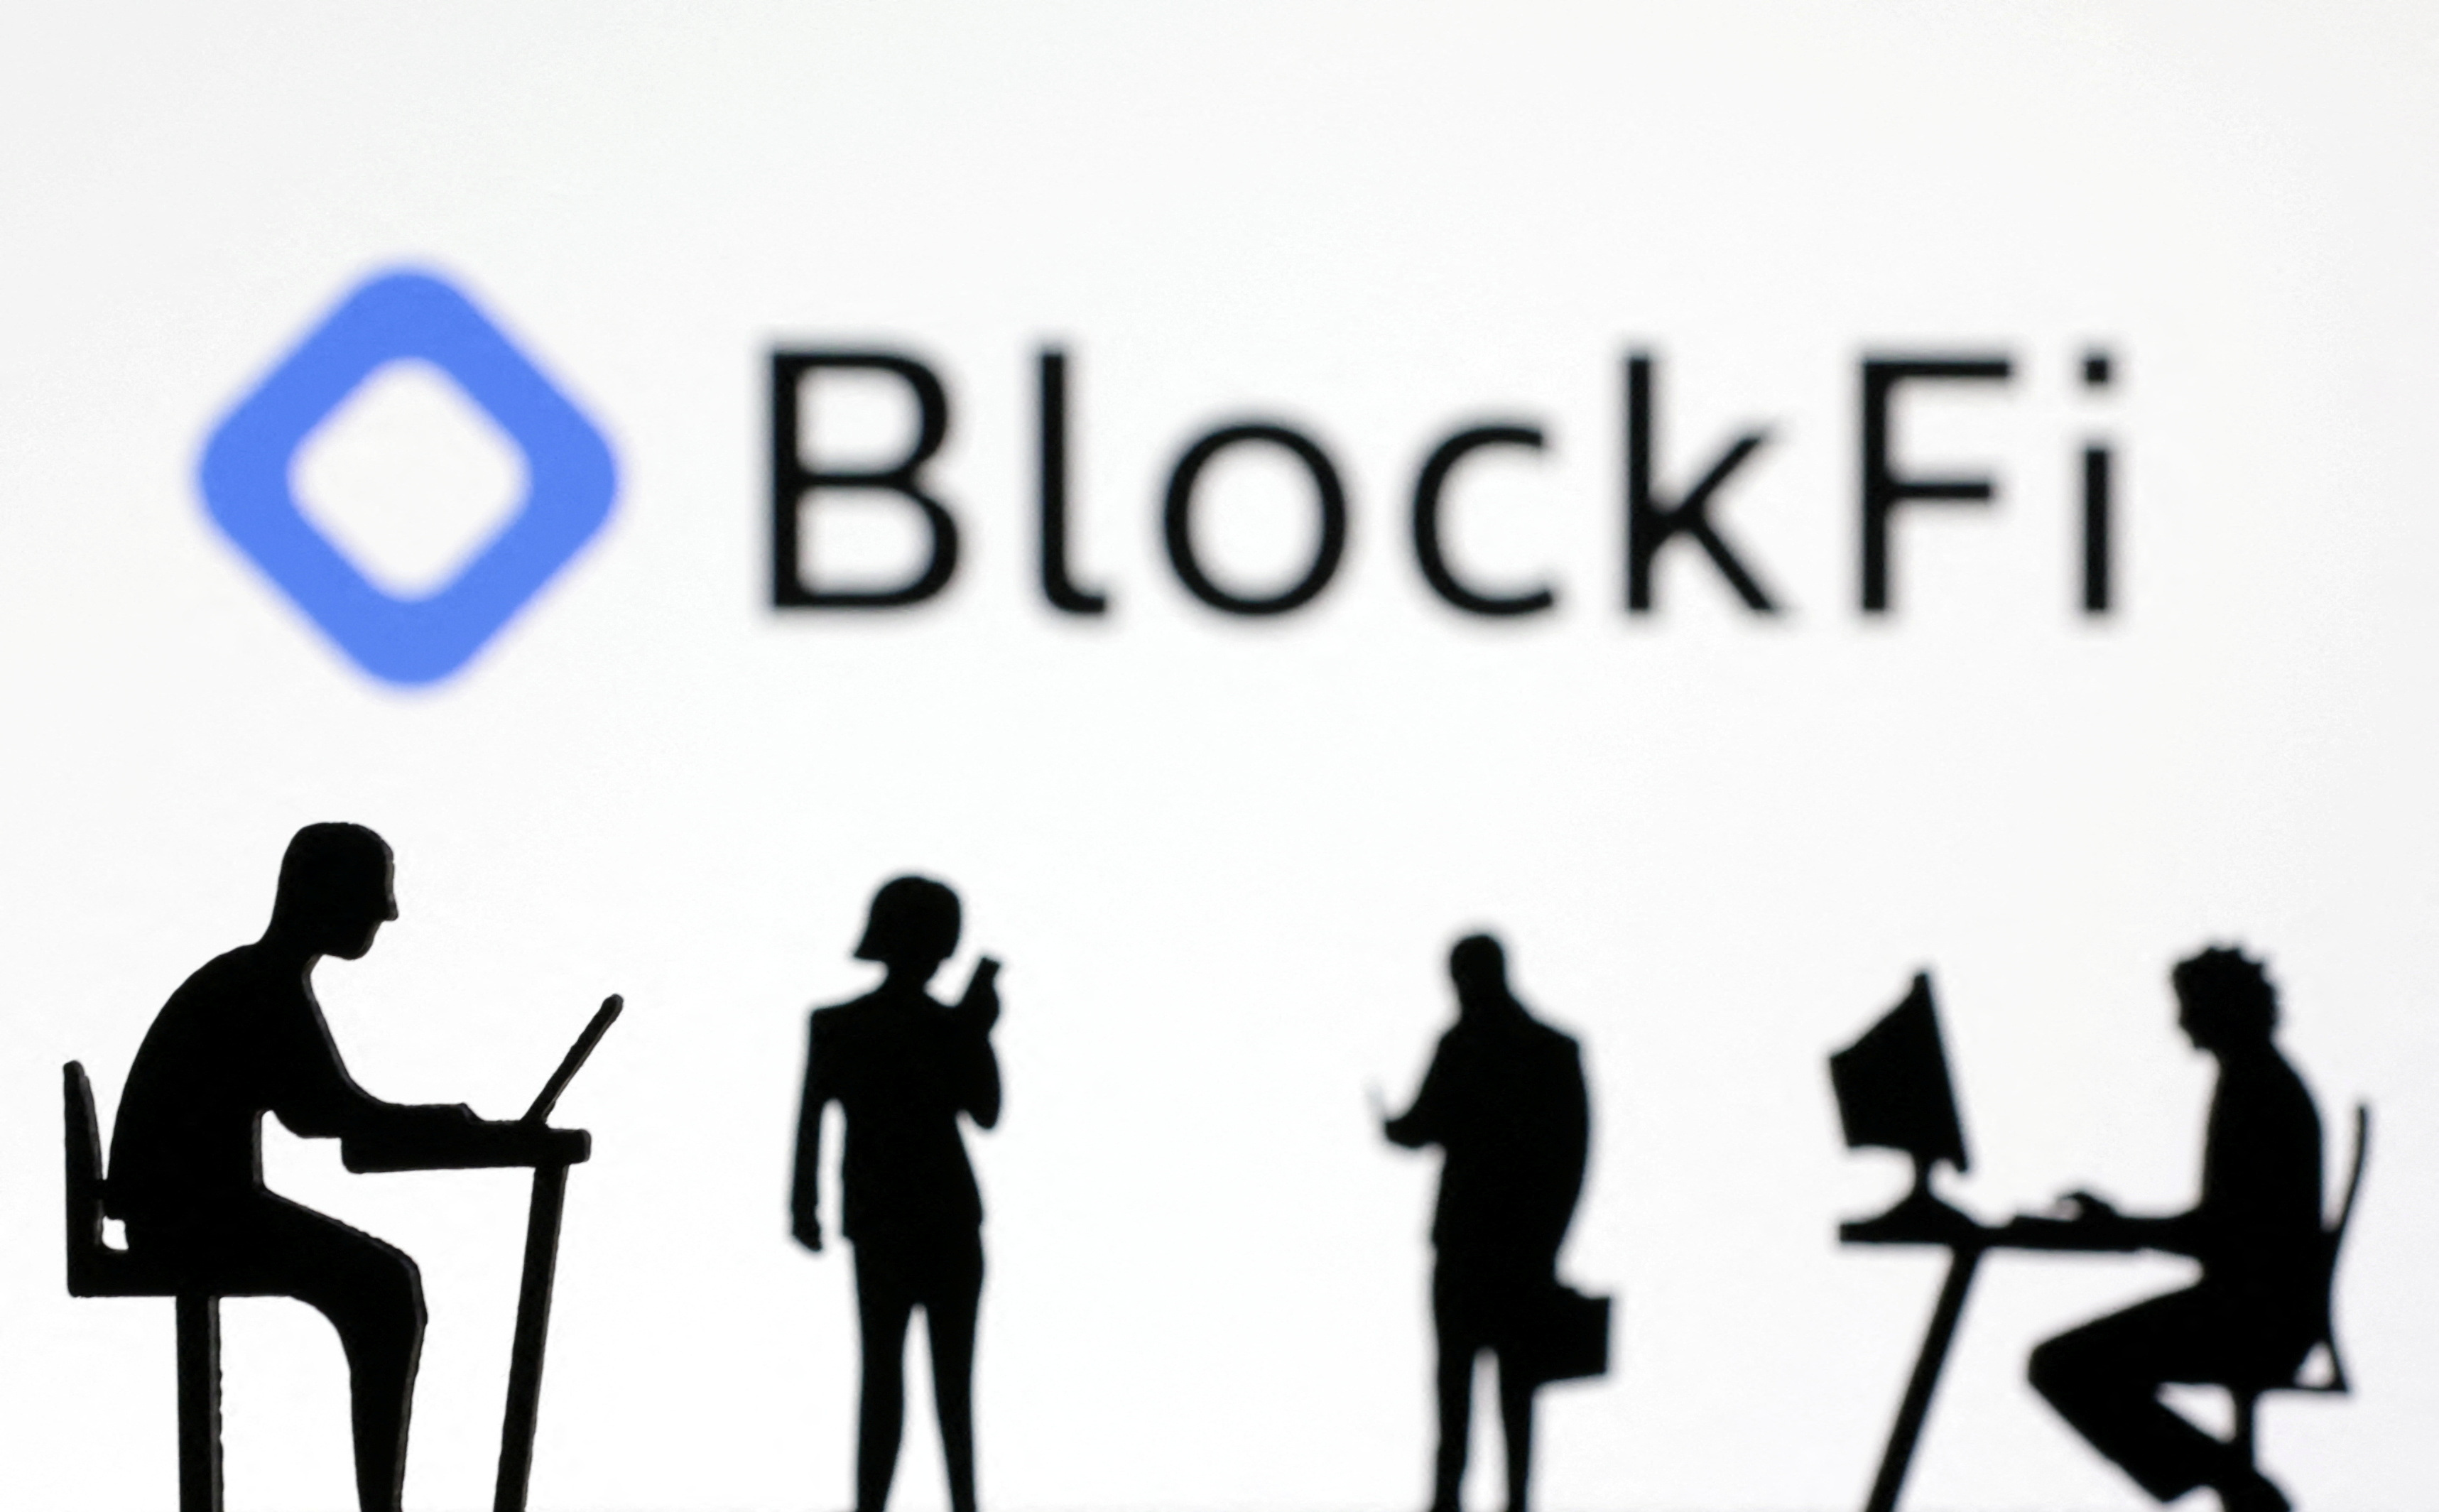 BlockFi Tells Bankruptcy Court It Is ‘The Antithesis of FTX’